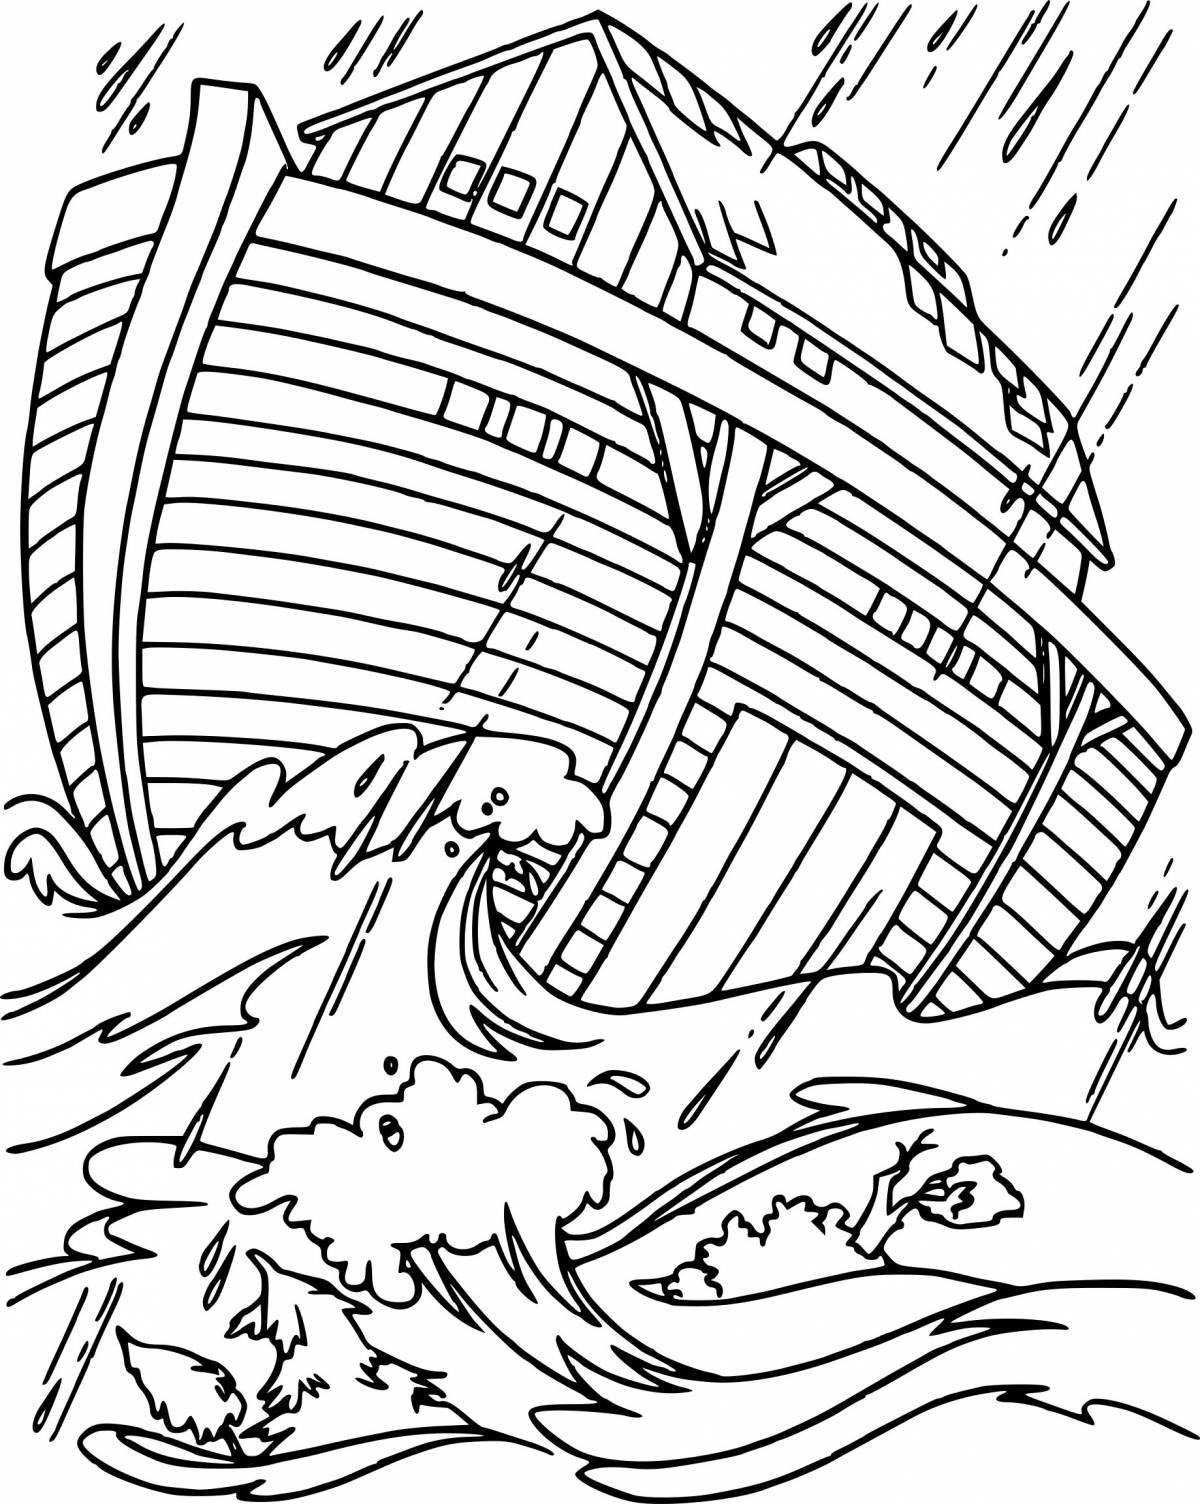 Great coloring picture of the flood